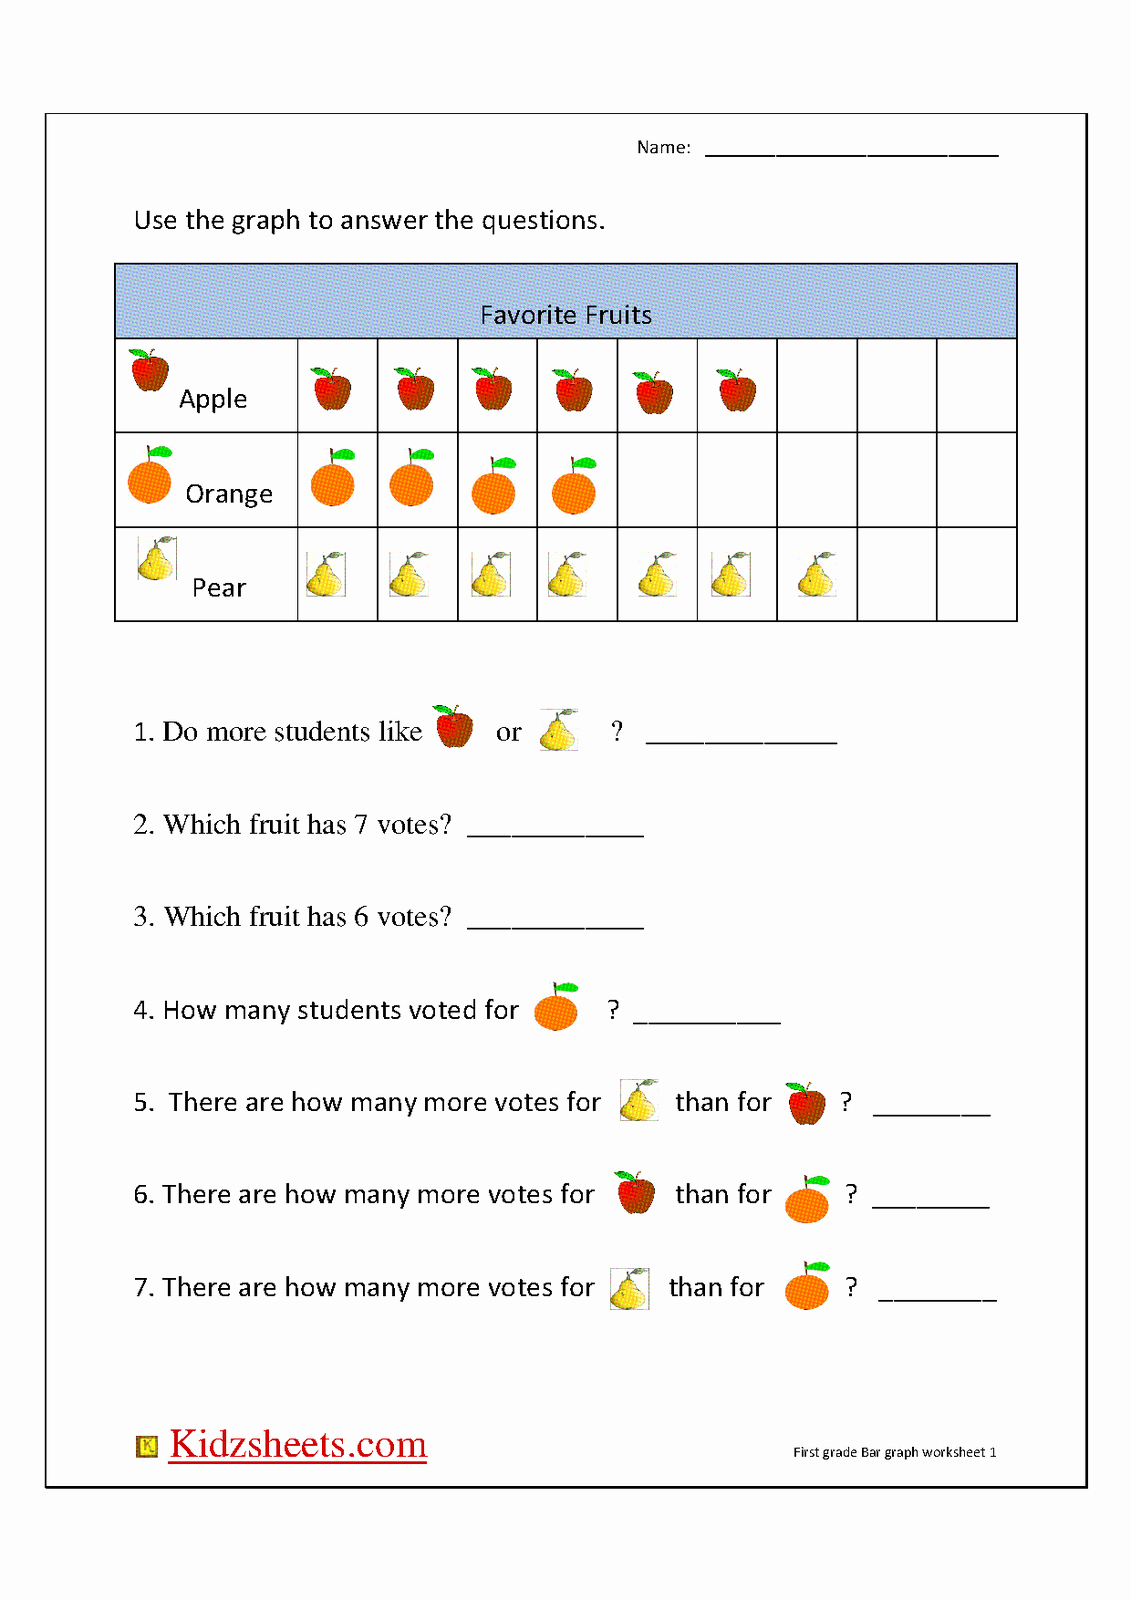 Graphing Worksheets for First Grade Fresh Kidz Worksheets First Grade Bar Graph1